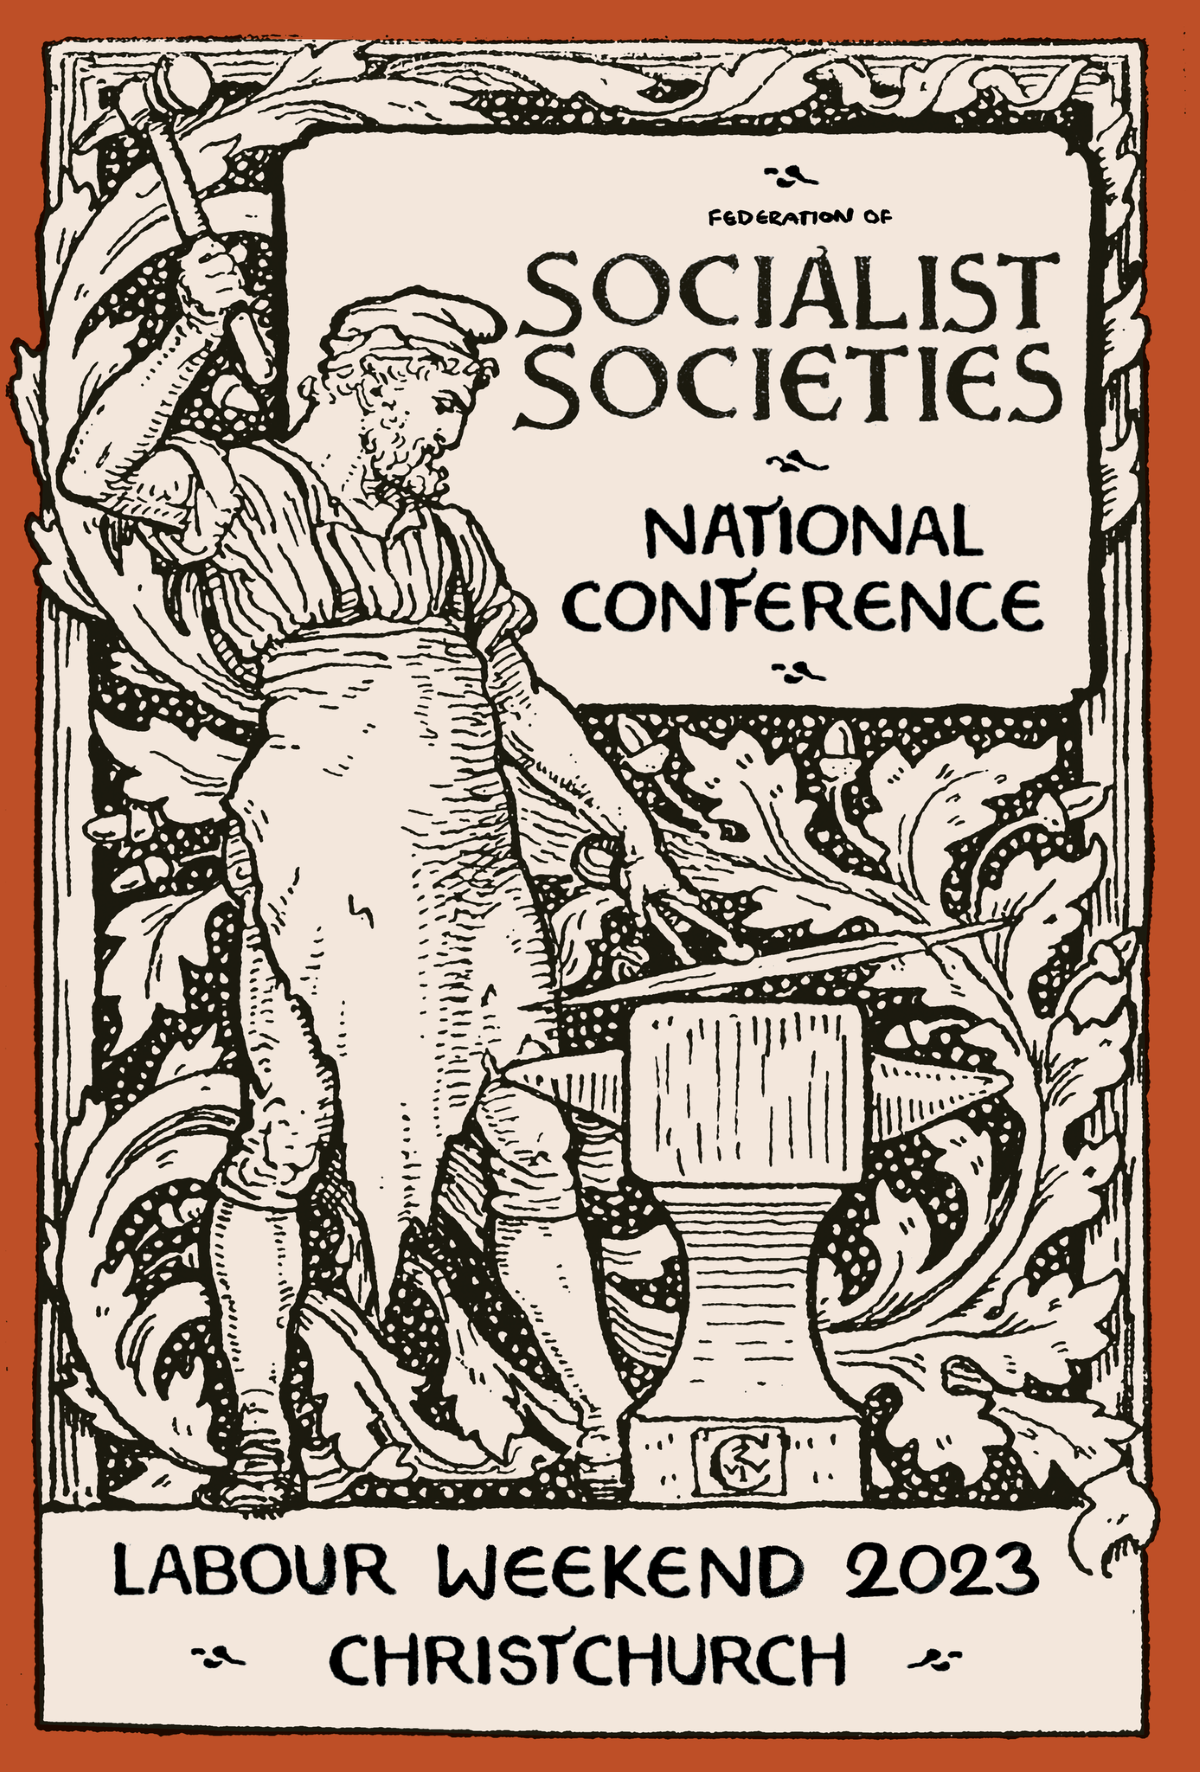 Federation of Socialist Societies 2023 Conference